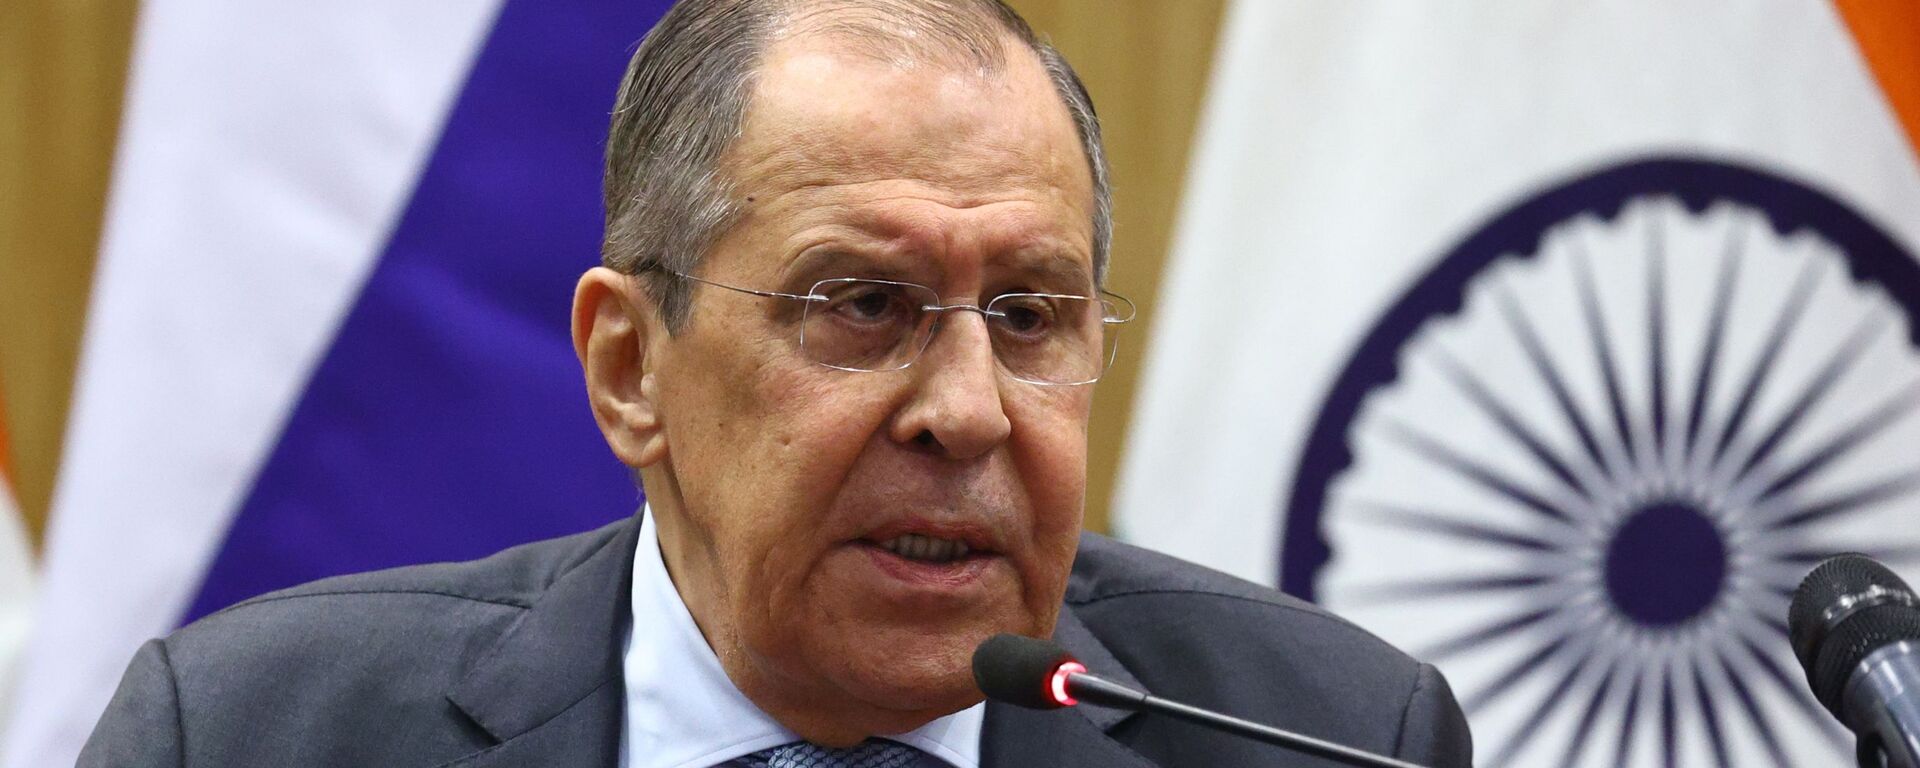  Russian Foreign Minister Sergei Lavrov attends a joint news conference with his Indian counterpart Subrahmanyam Jaishankar following their meeting, in New Delhi, India - Sputnik International, 1920, 25.09.2021